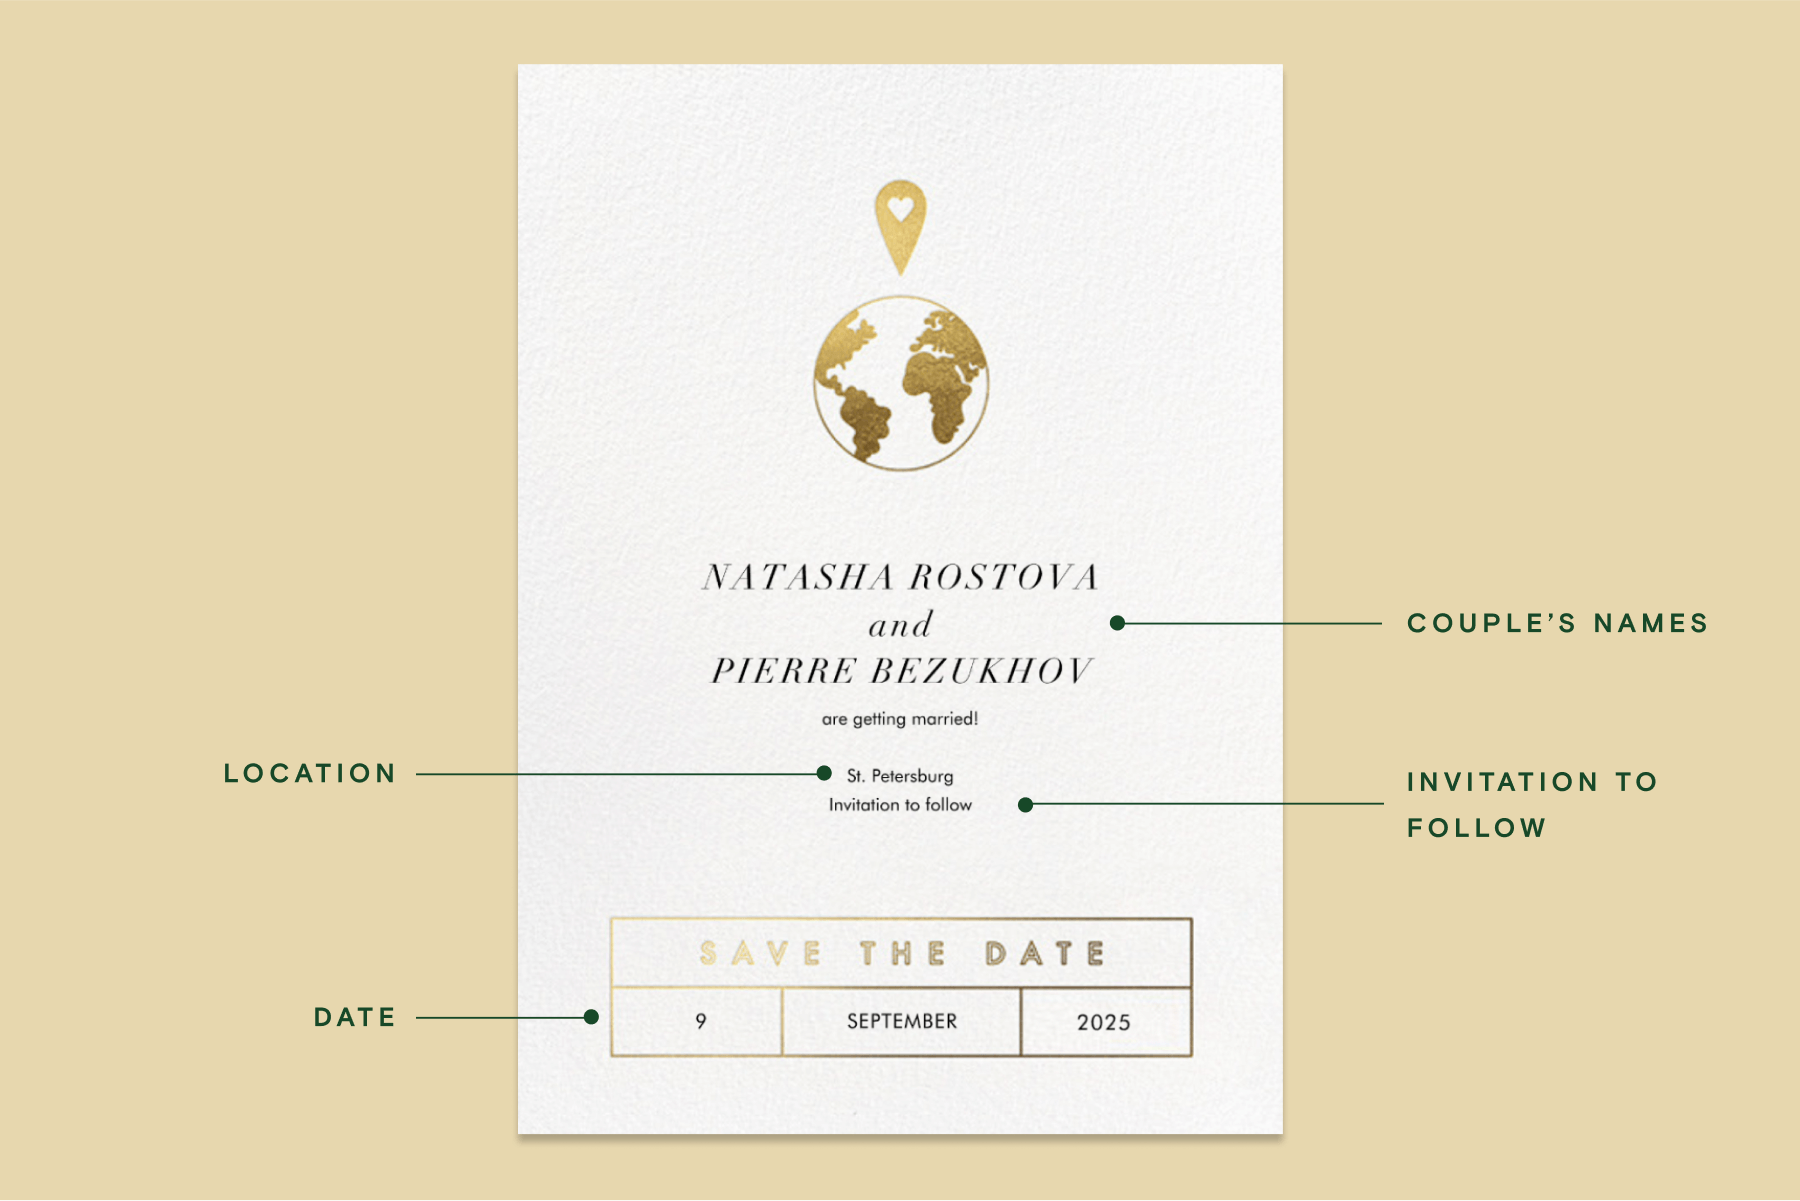 A save the date with a gold and white image of the earth and a heart-shaped marker, with individual card details noted.